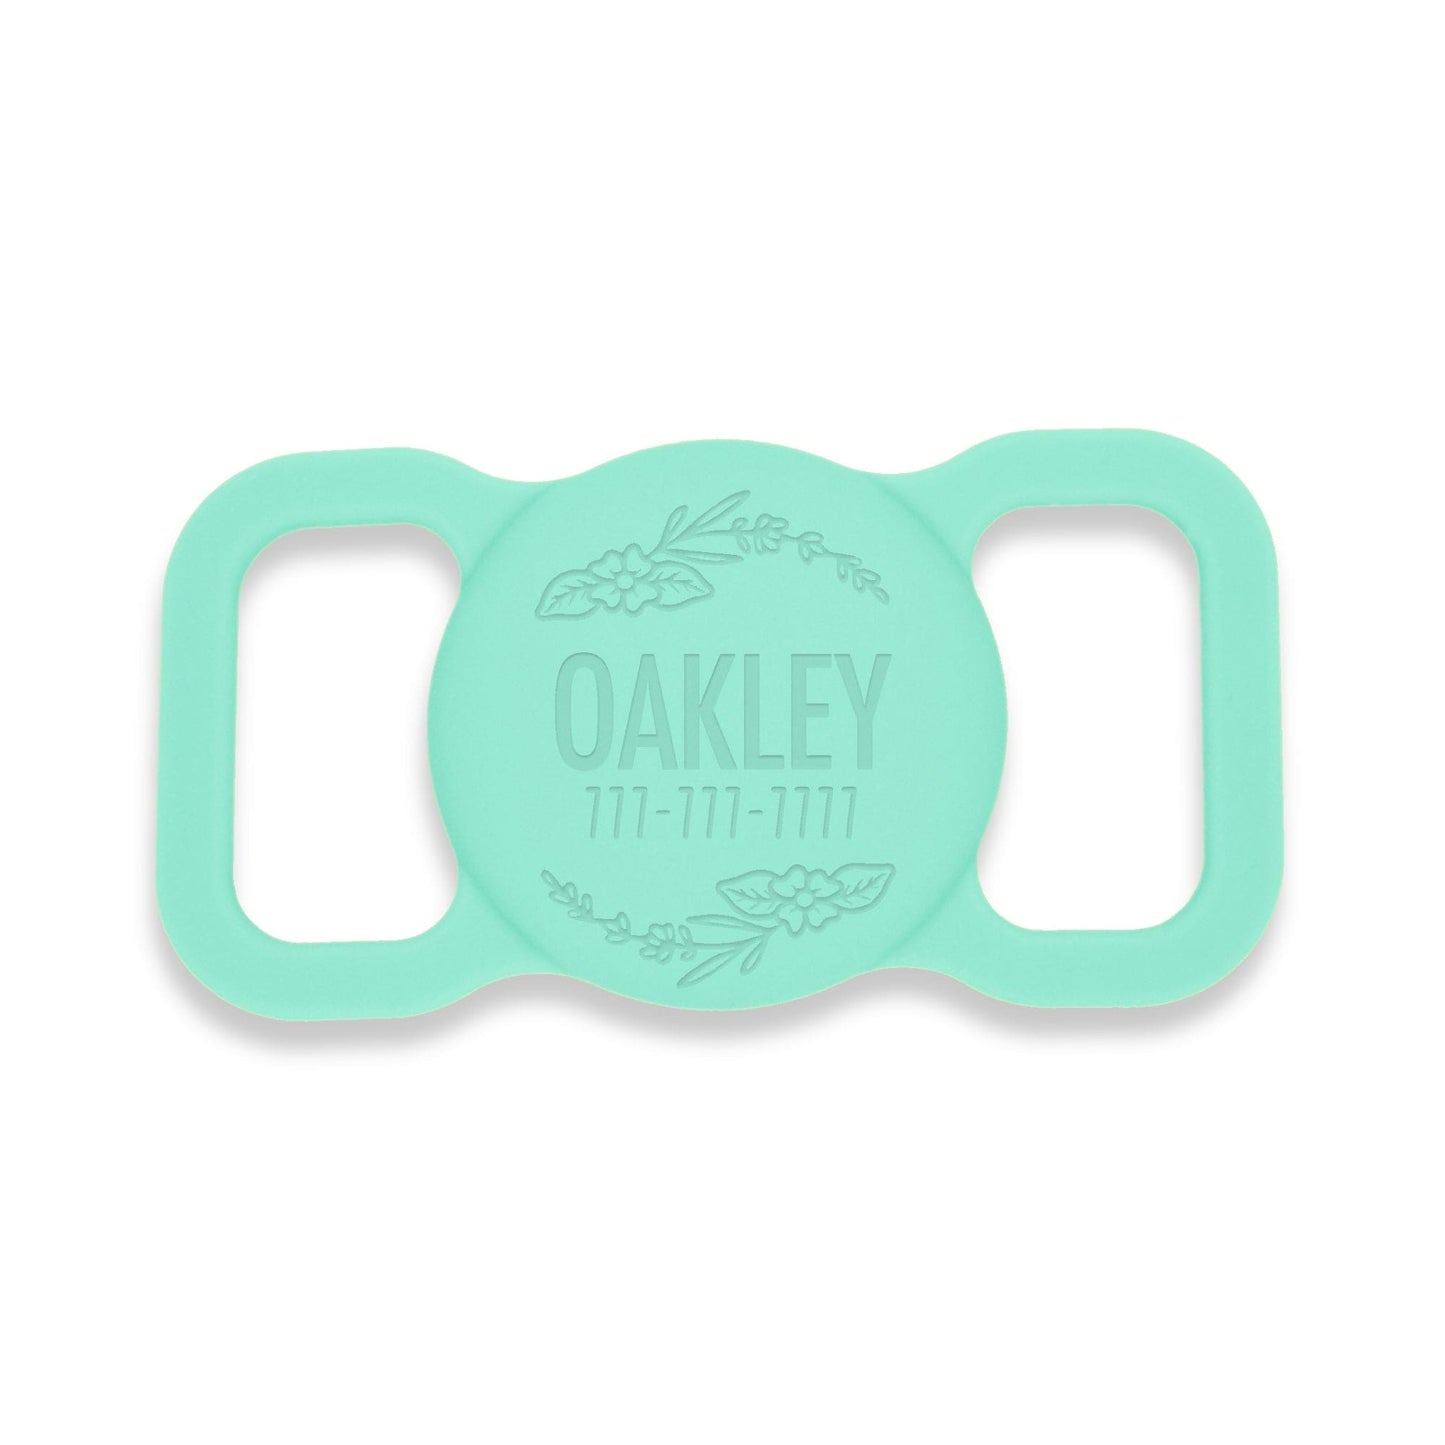 Aqua silicone AirTag holder with a floral design. Pet's name and a phone # is engraved on the front.